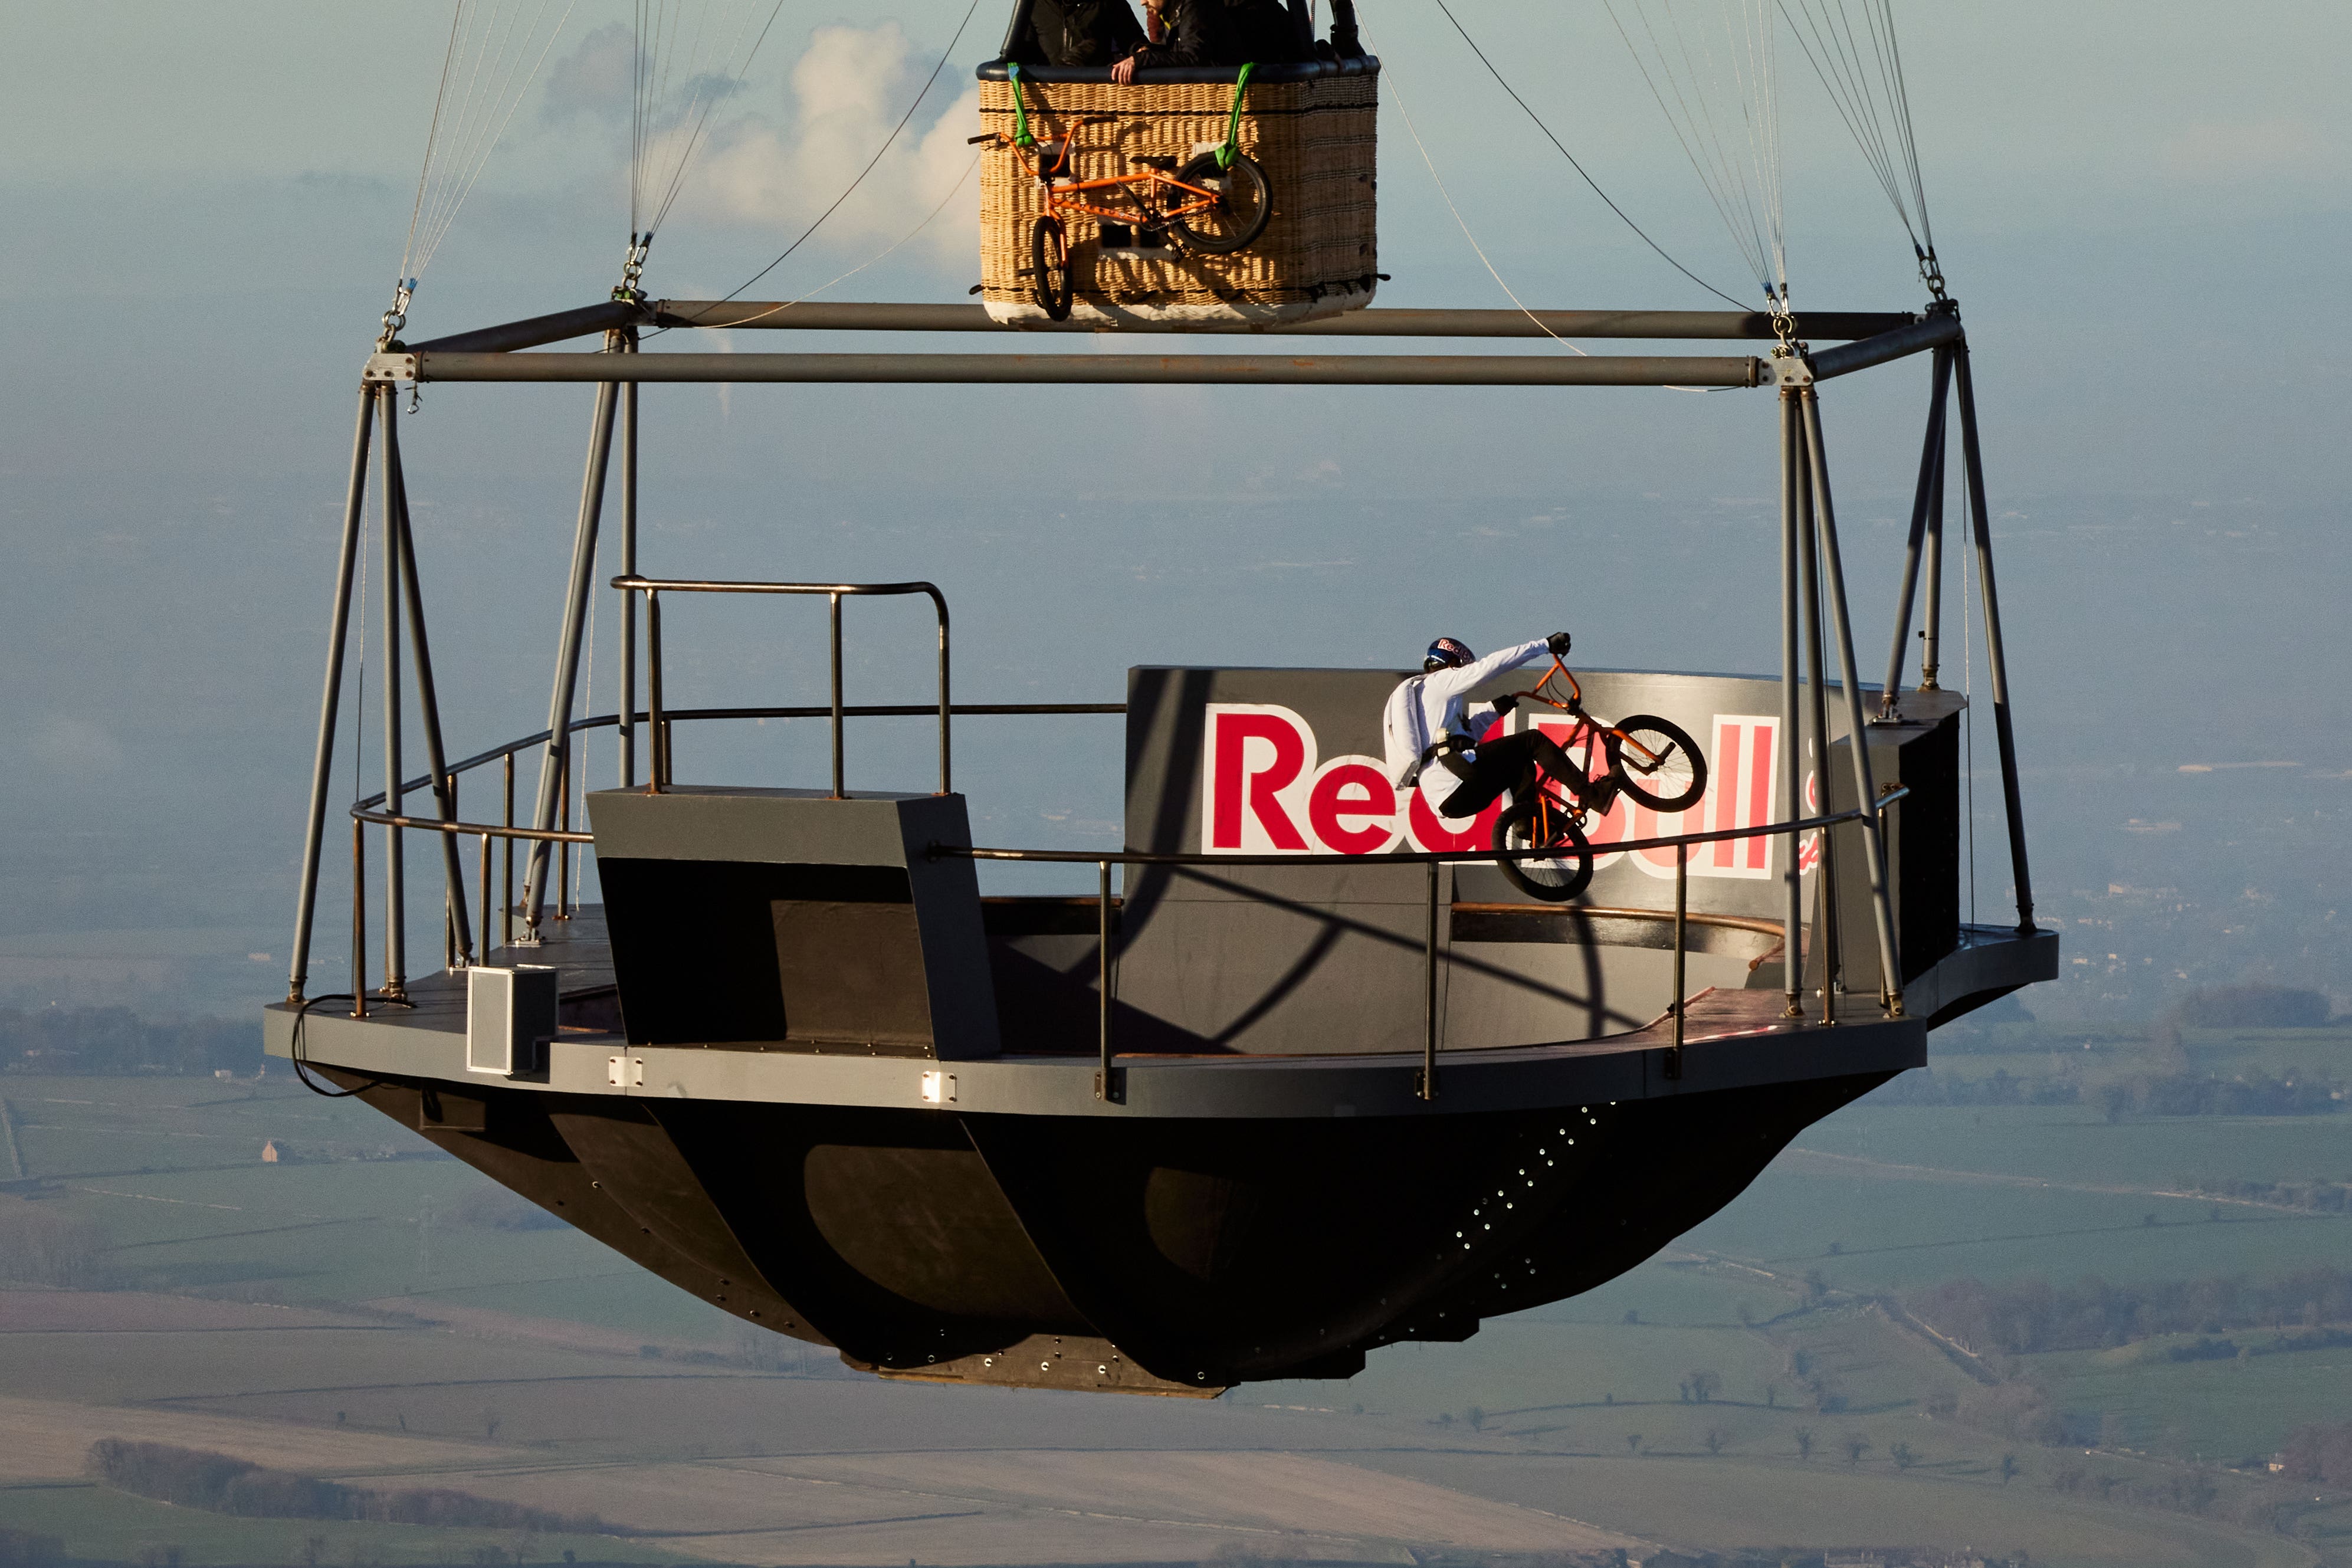 BMX rider performs tricks on surreal floating skatepark 2,000 feet up The Independent